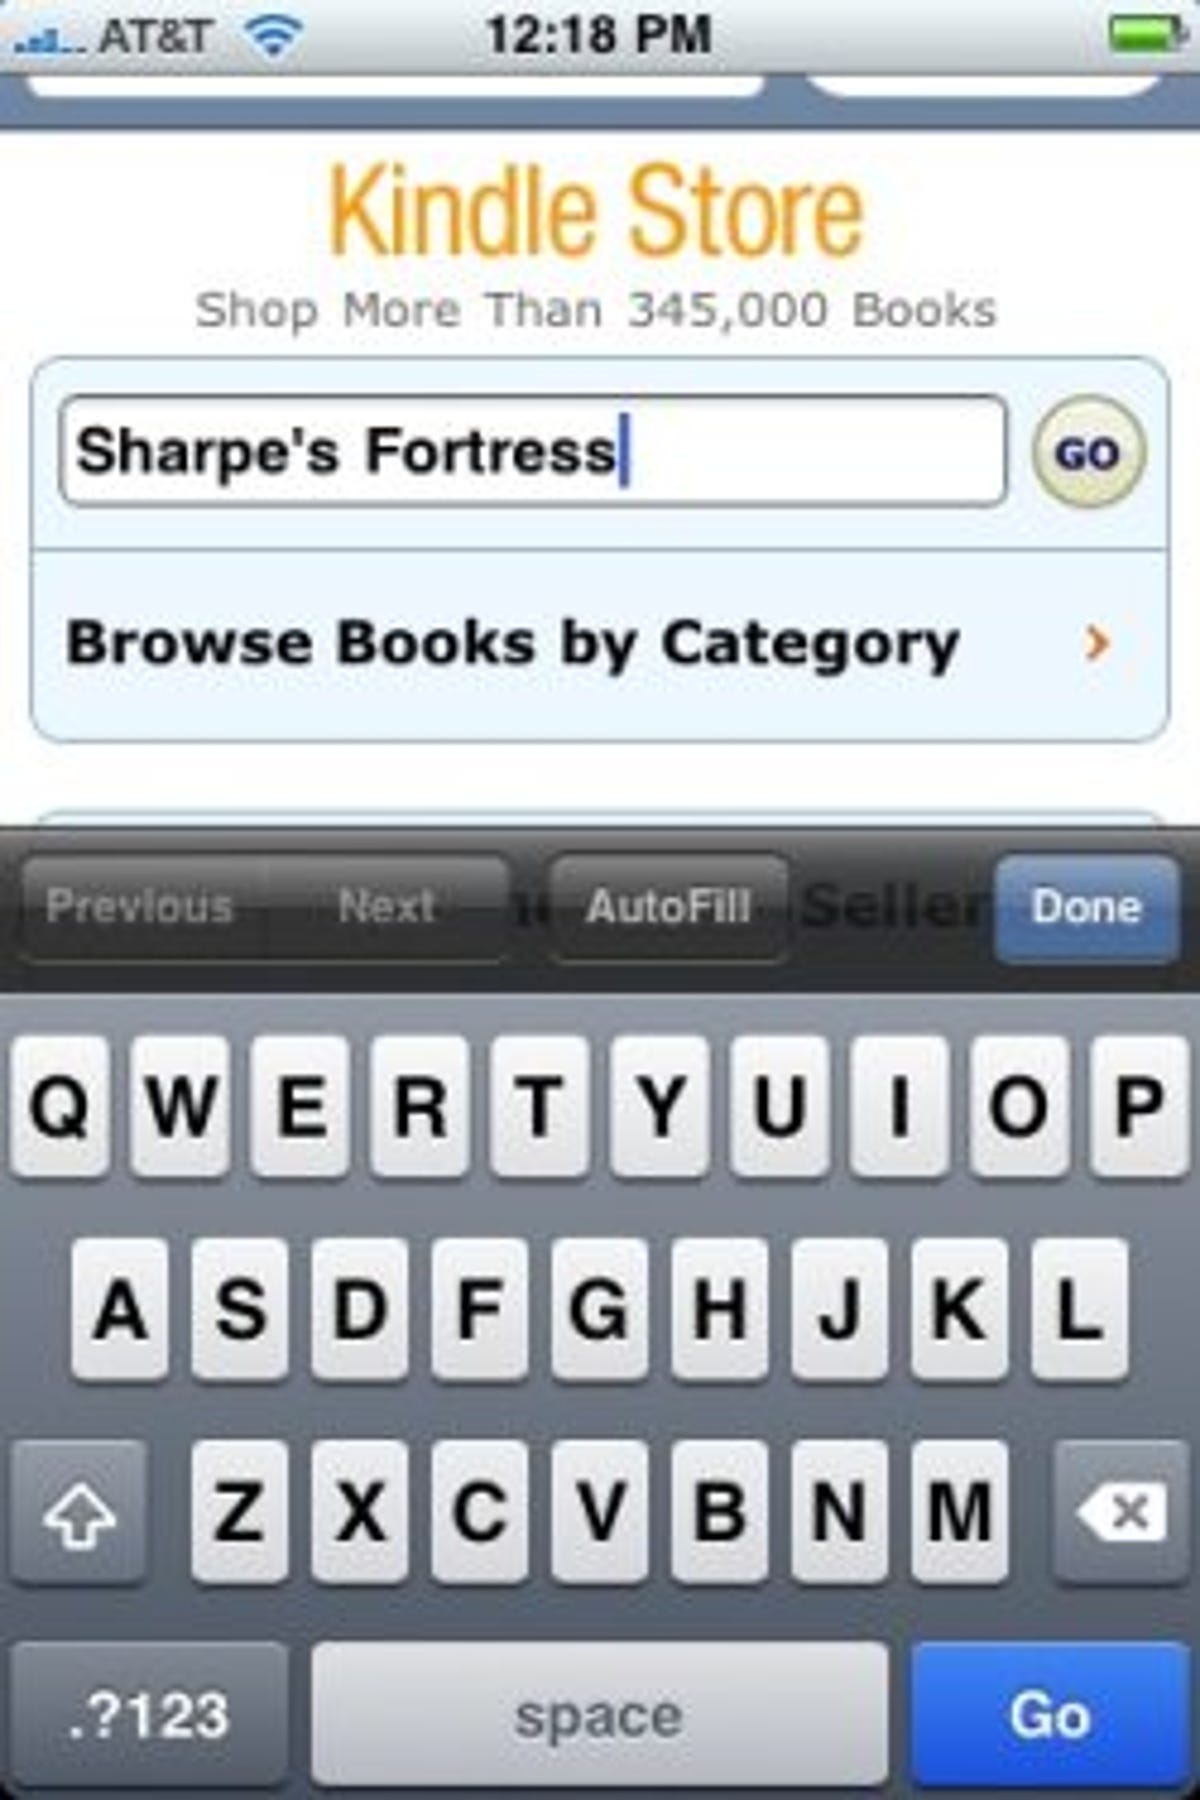 Purchasing a book is a cumbersome back-and-forth between the Kindle app and the Amazon Web site.